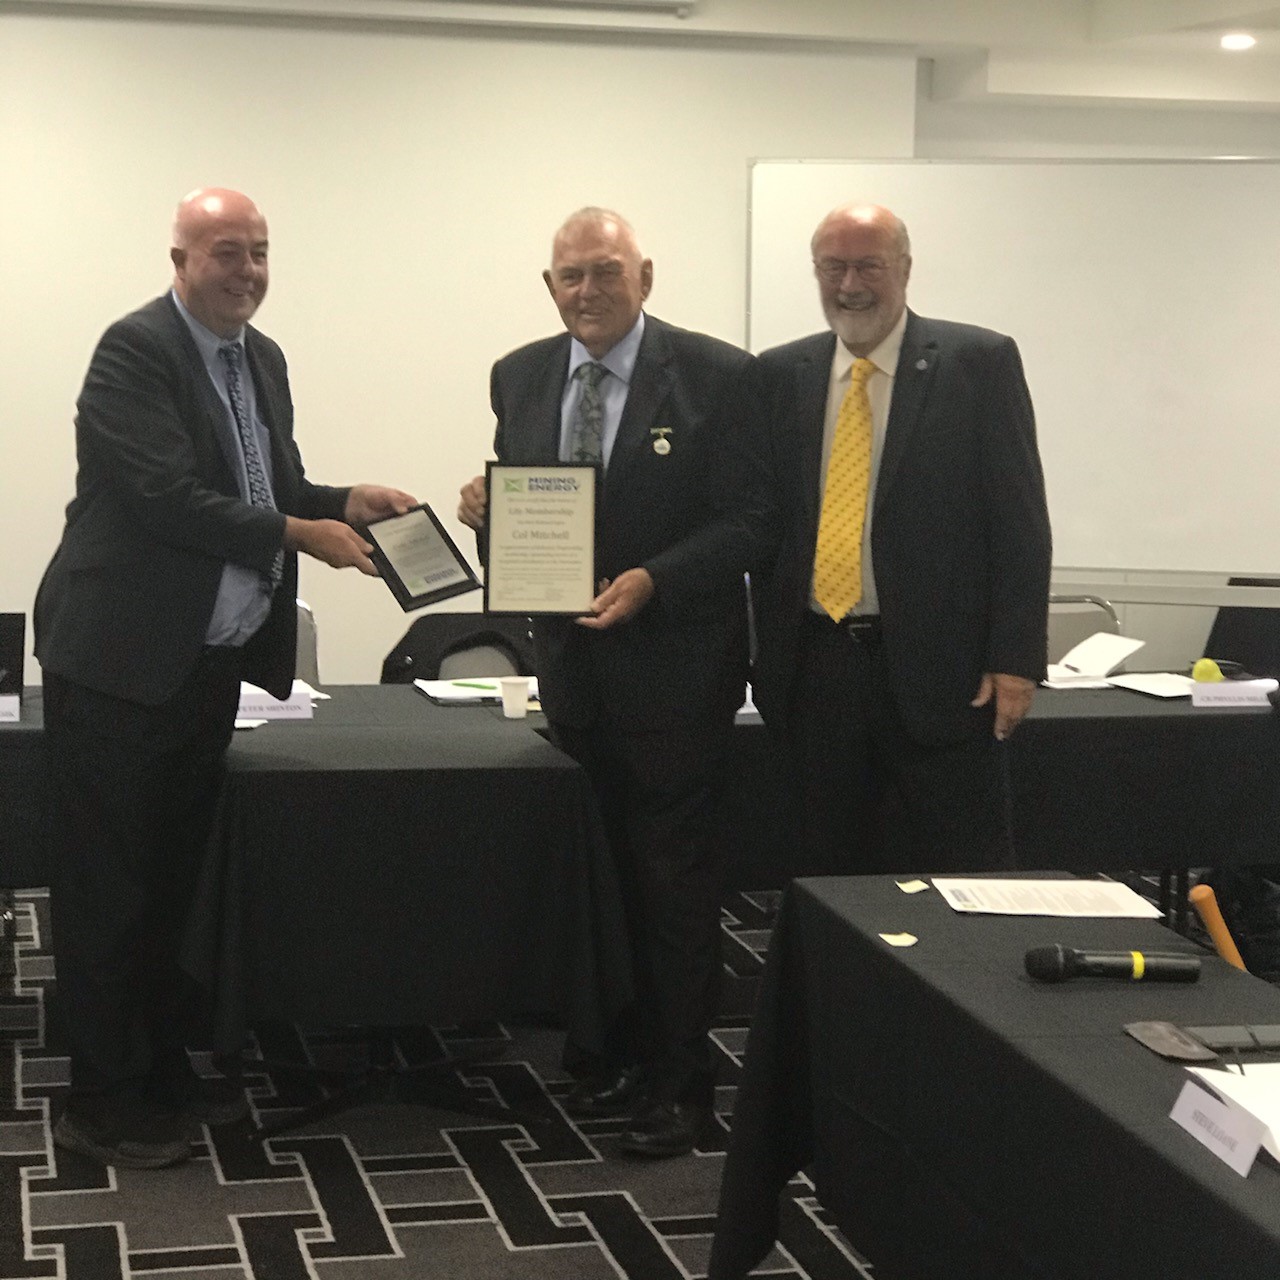 Col Mitchell receiving Life Membership from Chair Cr Peter Shinton and Cr Michael Banasik at Ordinary Meeting 5th March 2020.